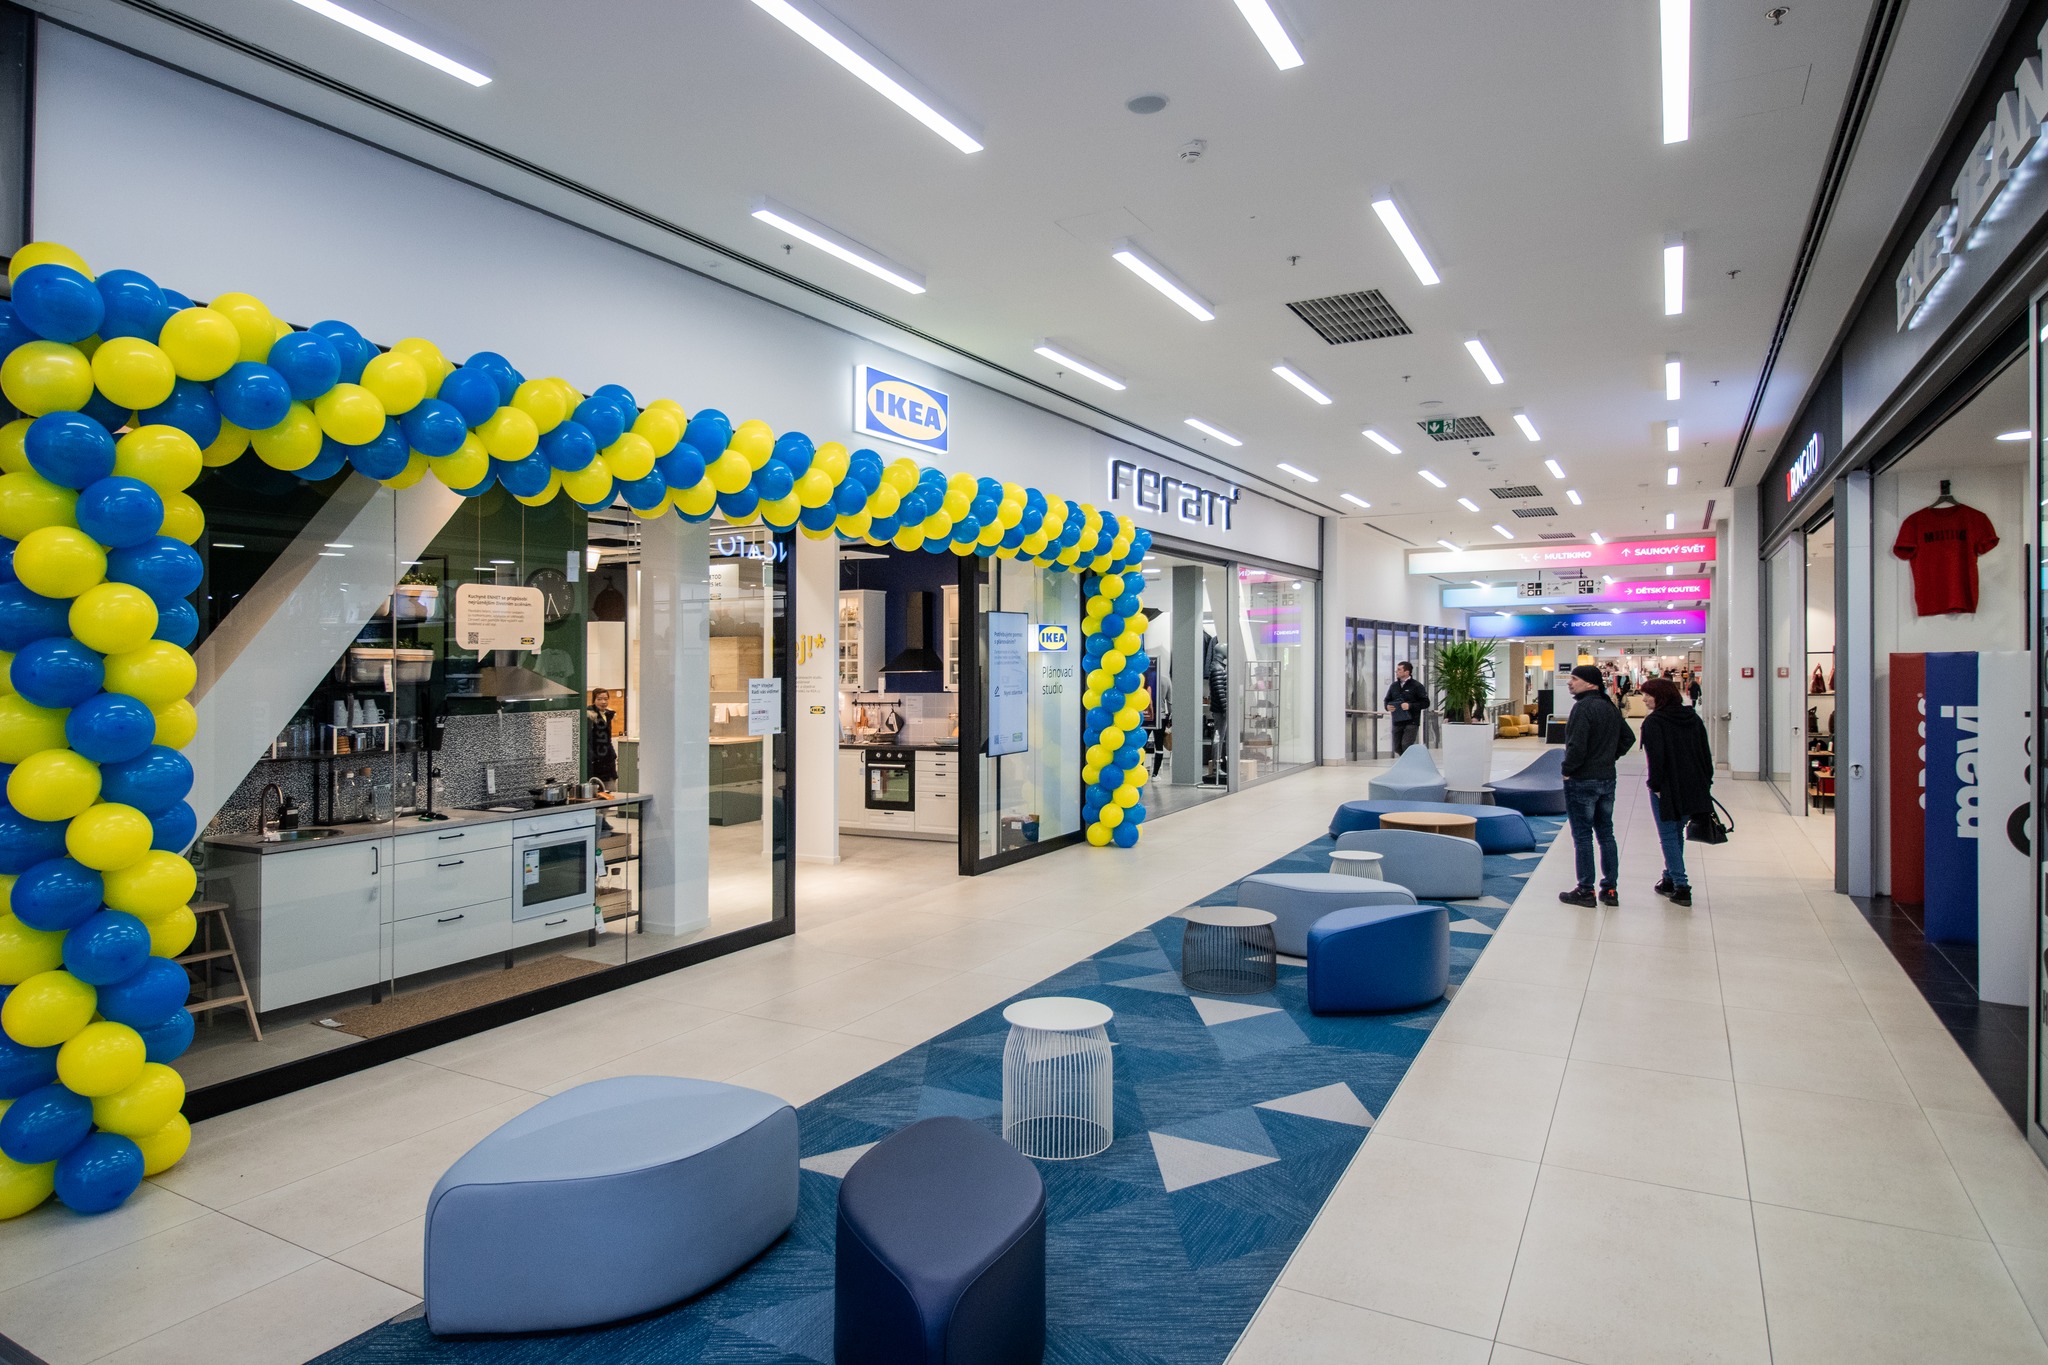 IKEA is the new tenant of IGY shopping centre